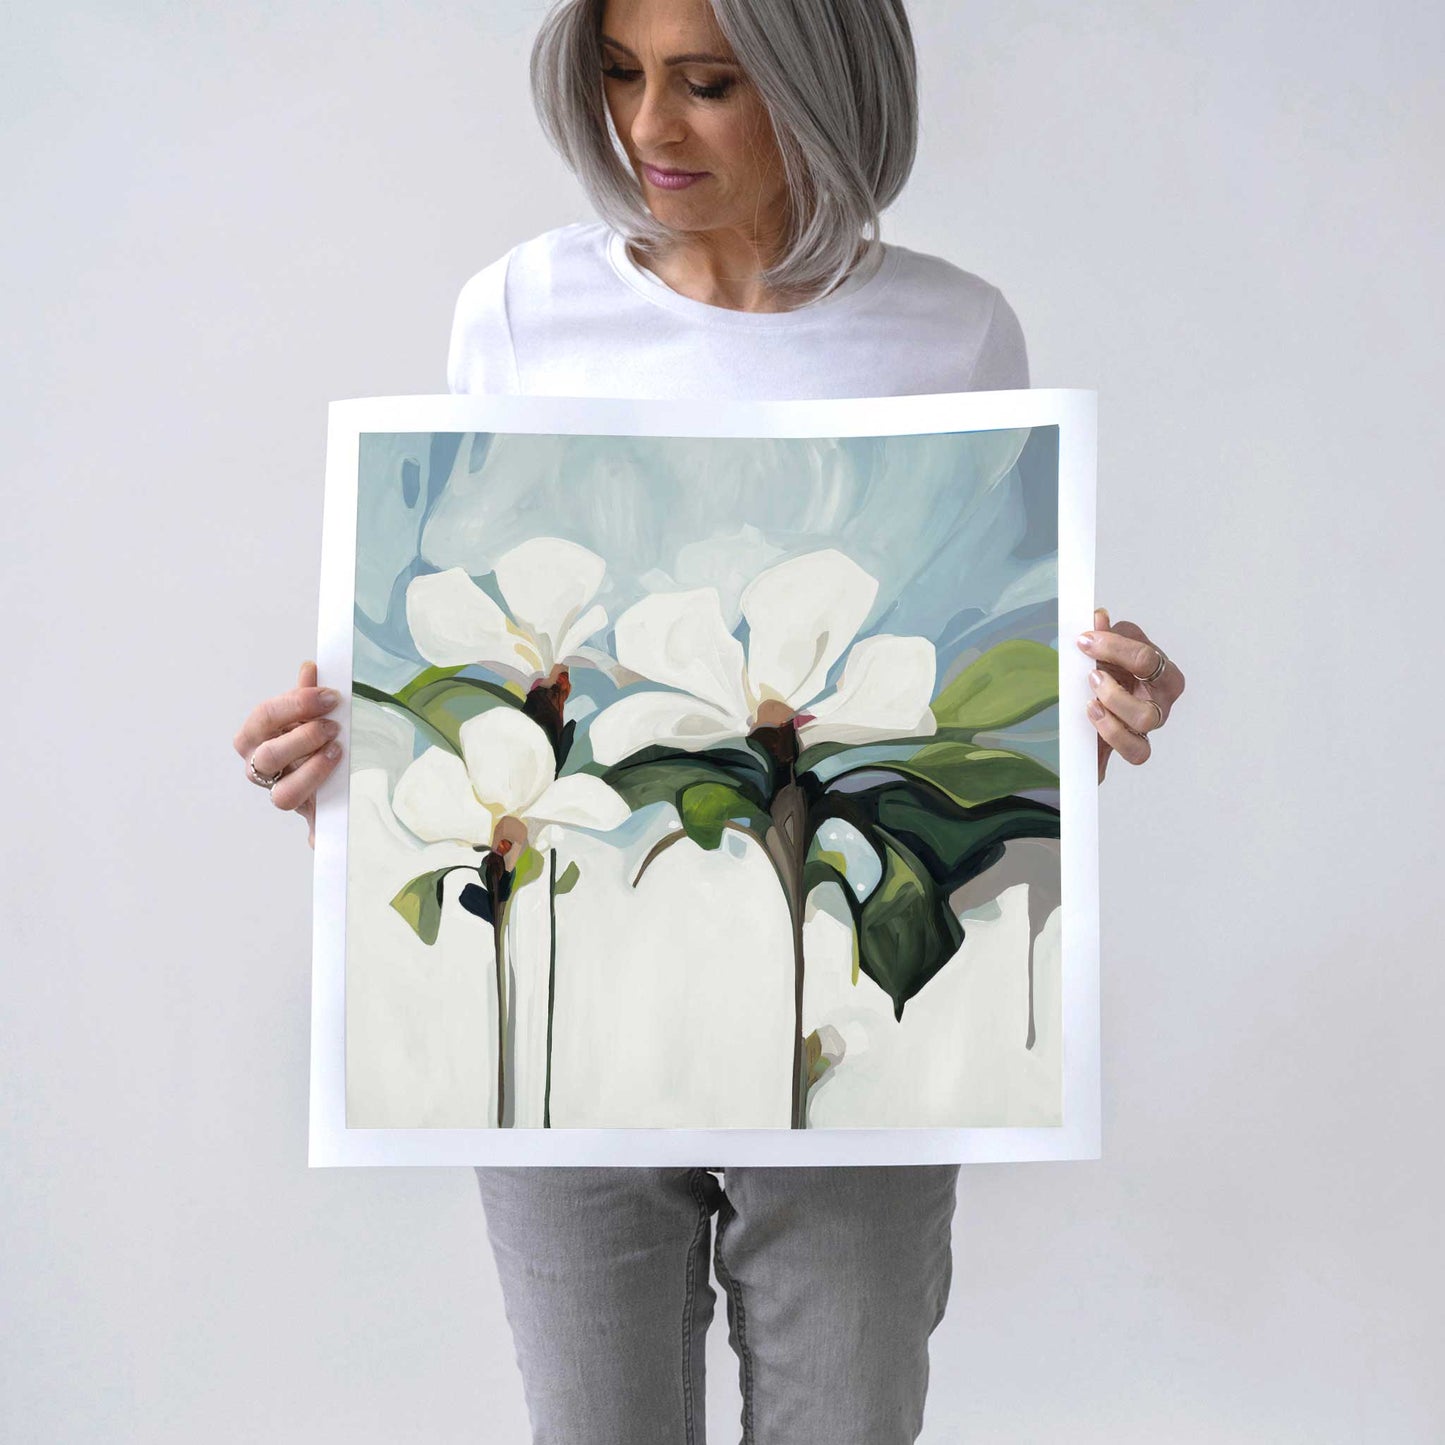 Canadian artist Susannah Bleasby holding 20x20 art print of an acrylic flower painting with white flowers on a light blue background